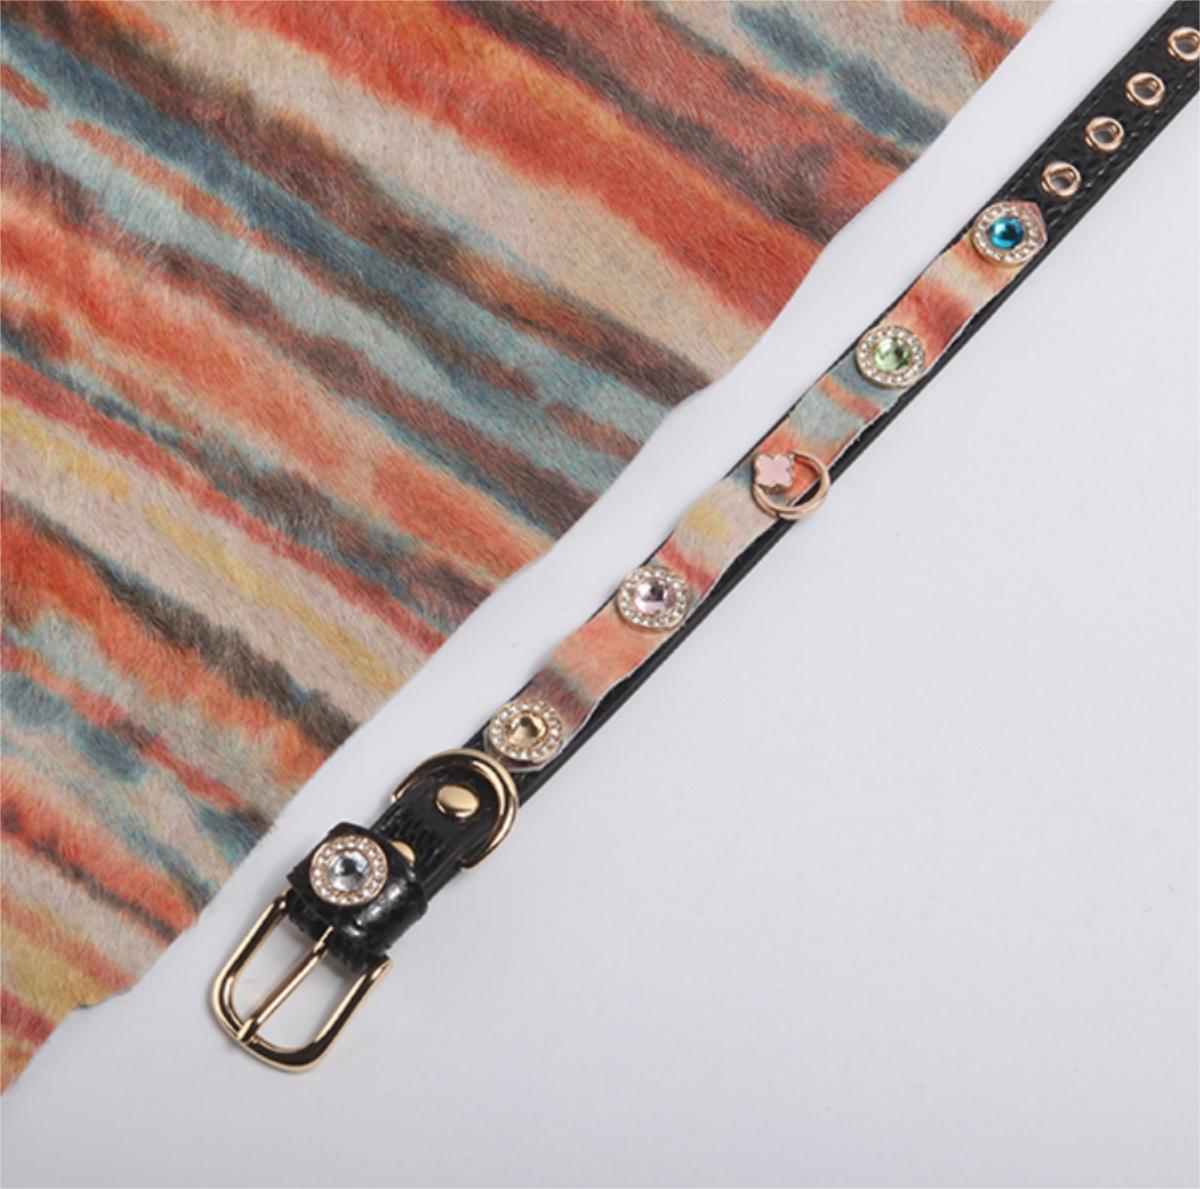 Dog Collar - Colored with horse hair